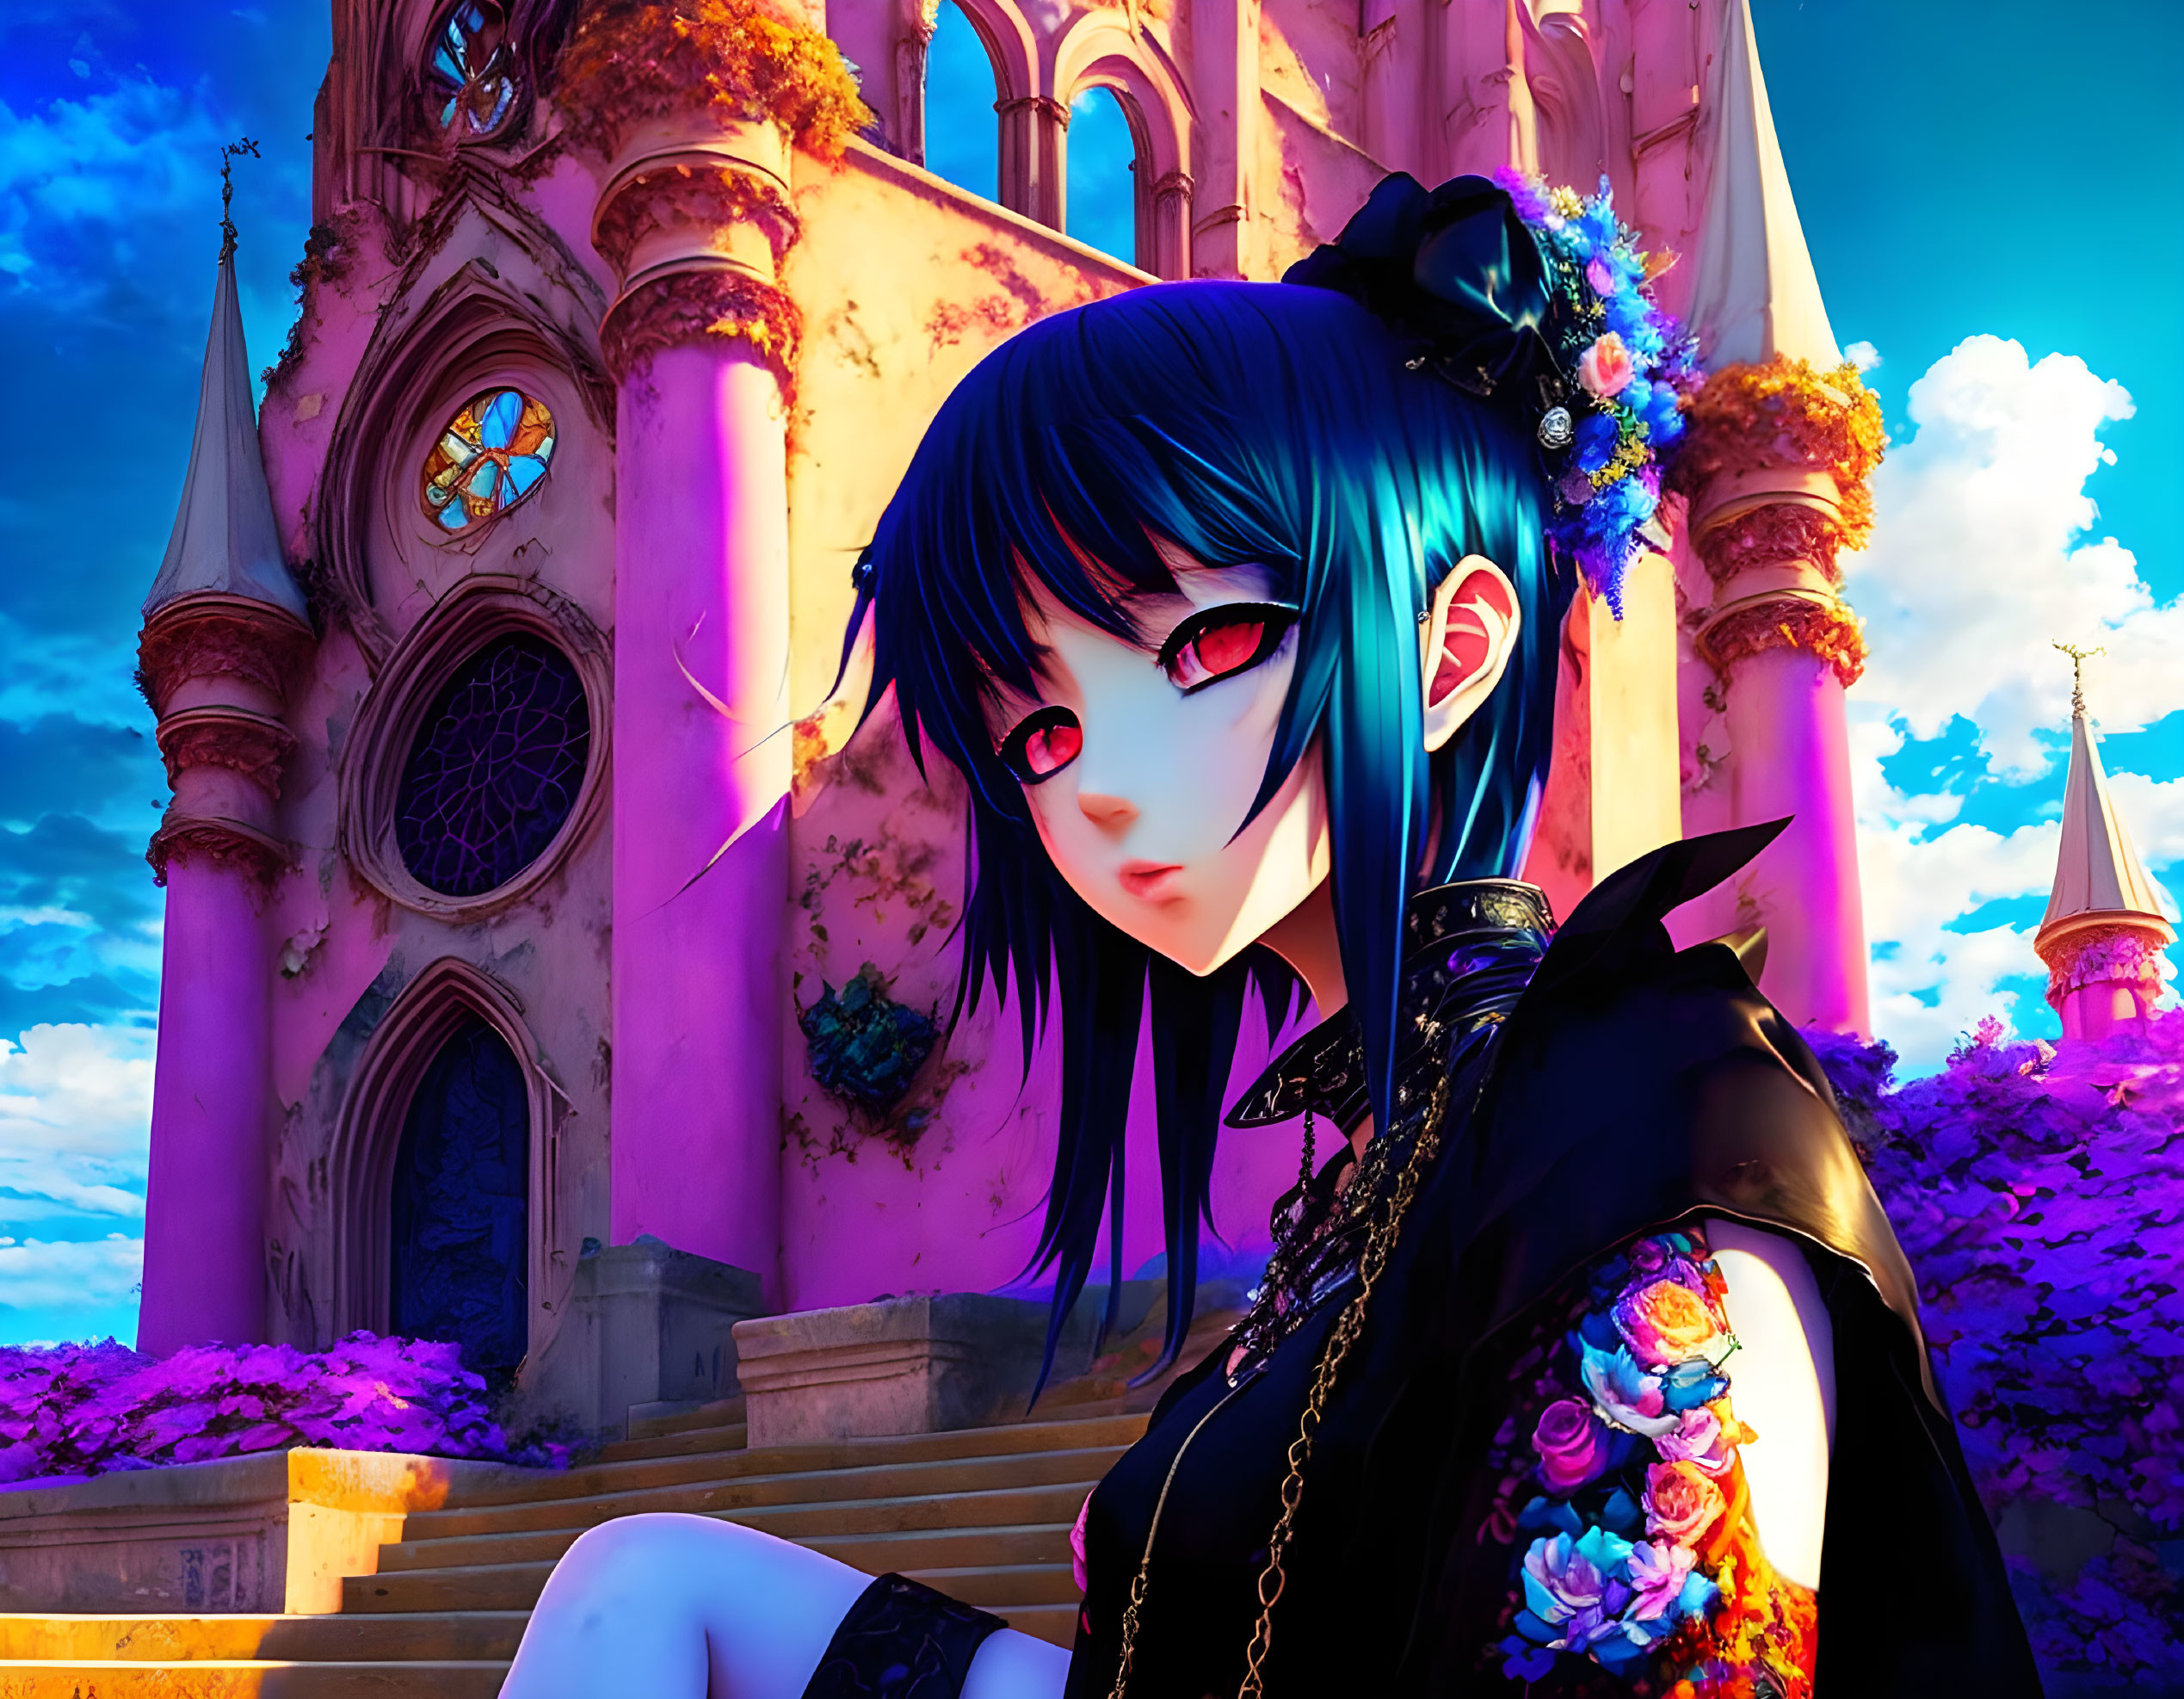 Blue-haired anime girl in gothic attire at pink cathedral steps under purple sky